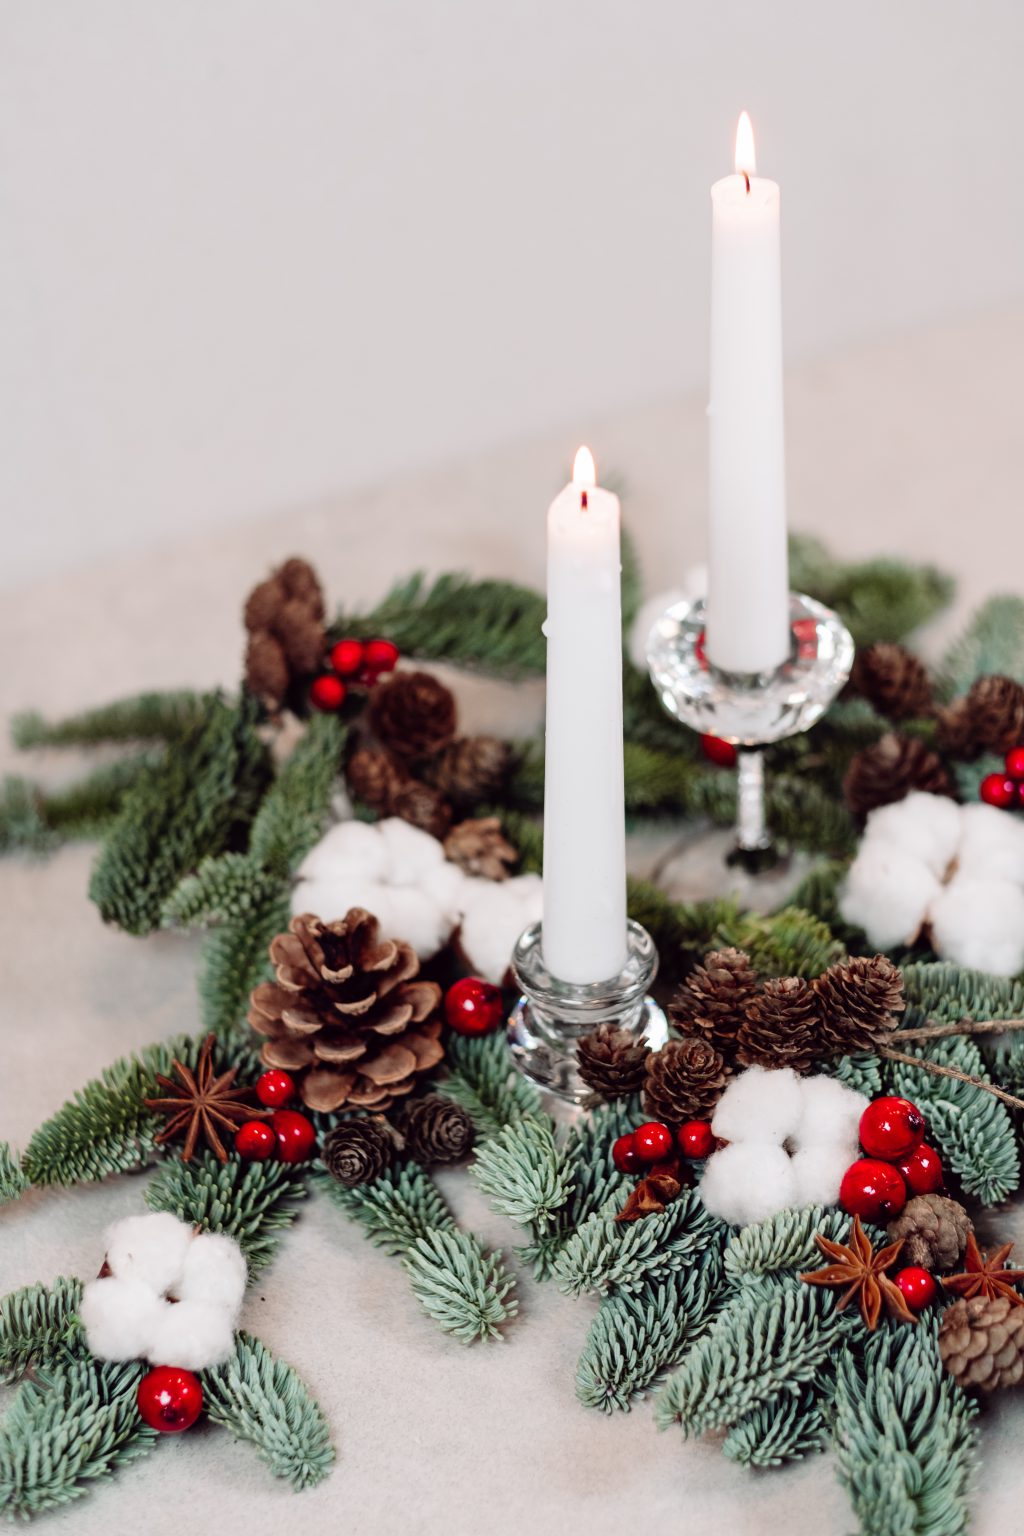 Christmas spruce decoration with candles 2 - free stock photo